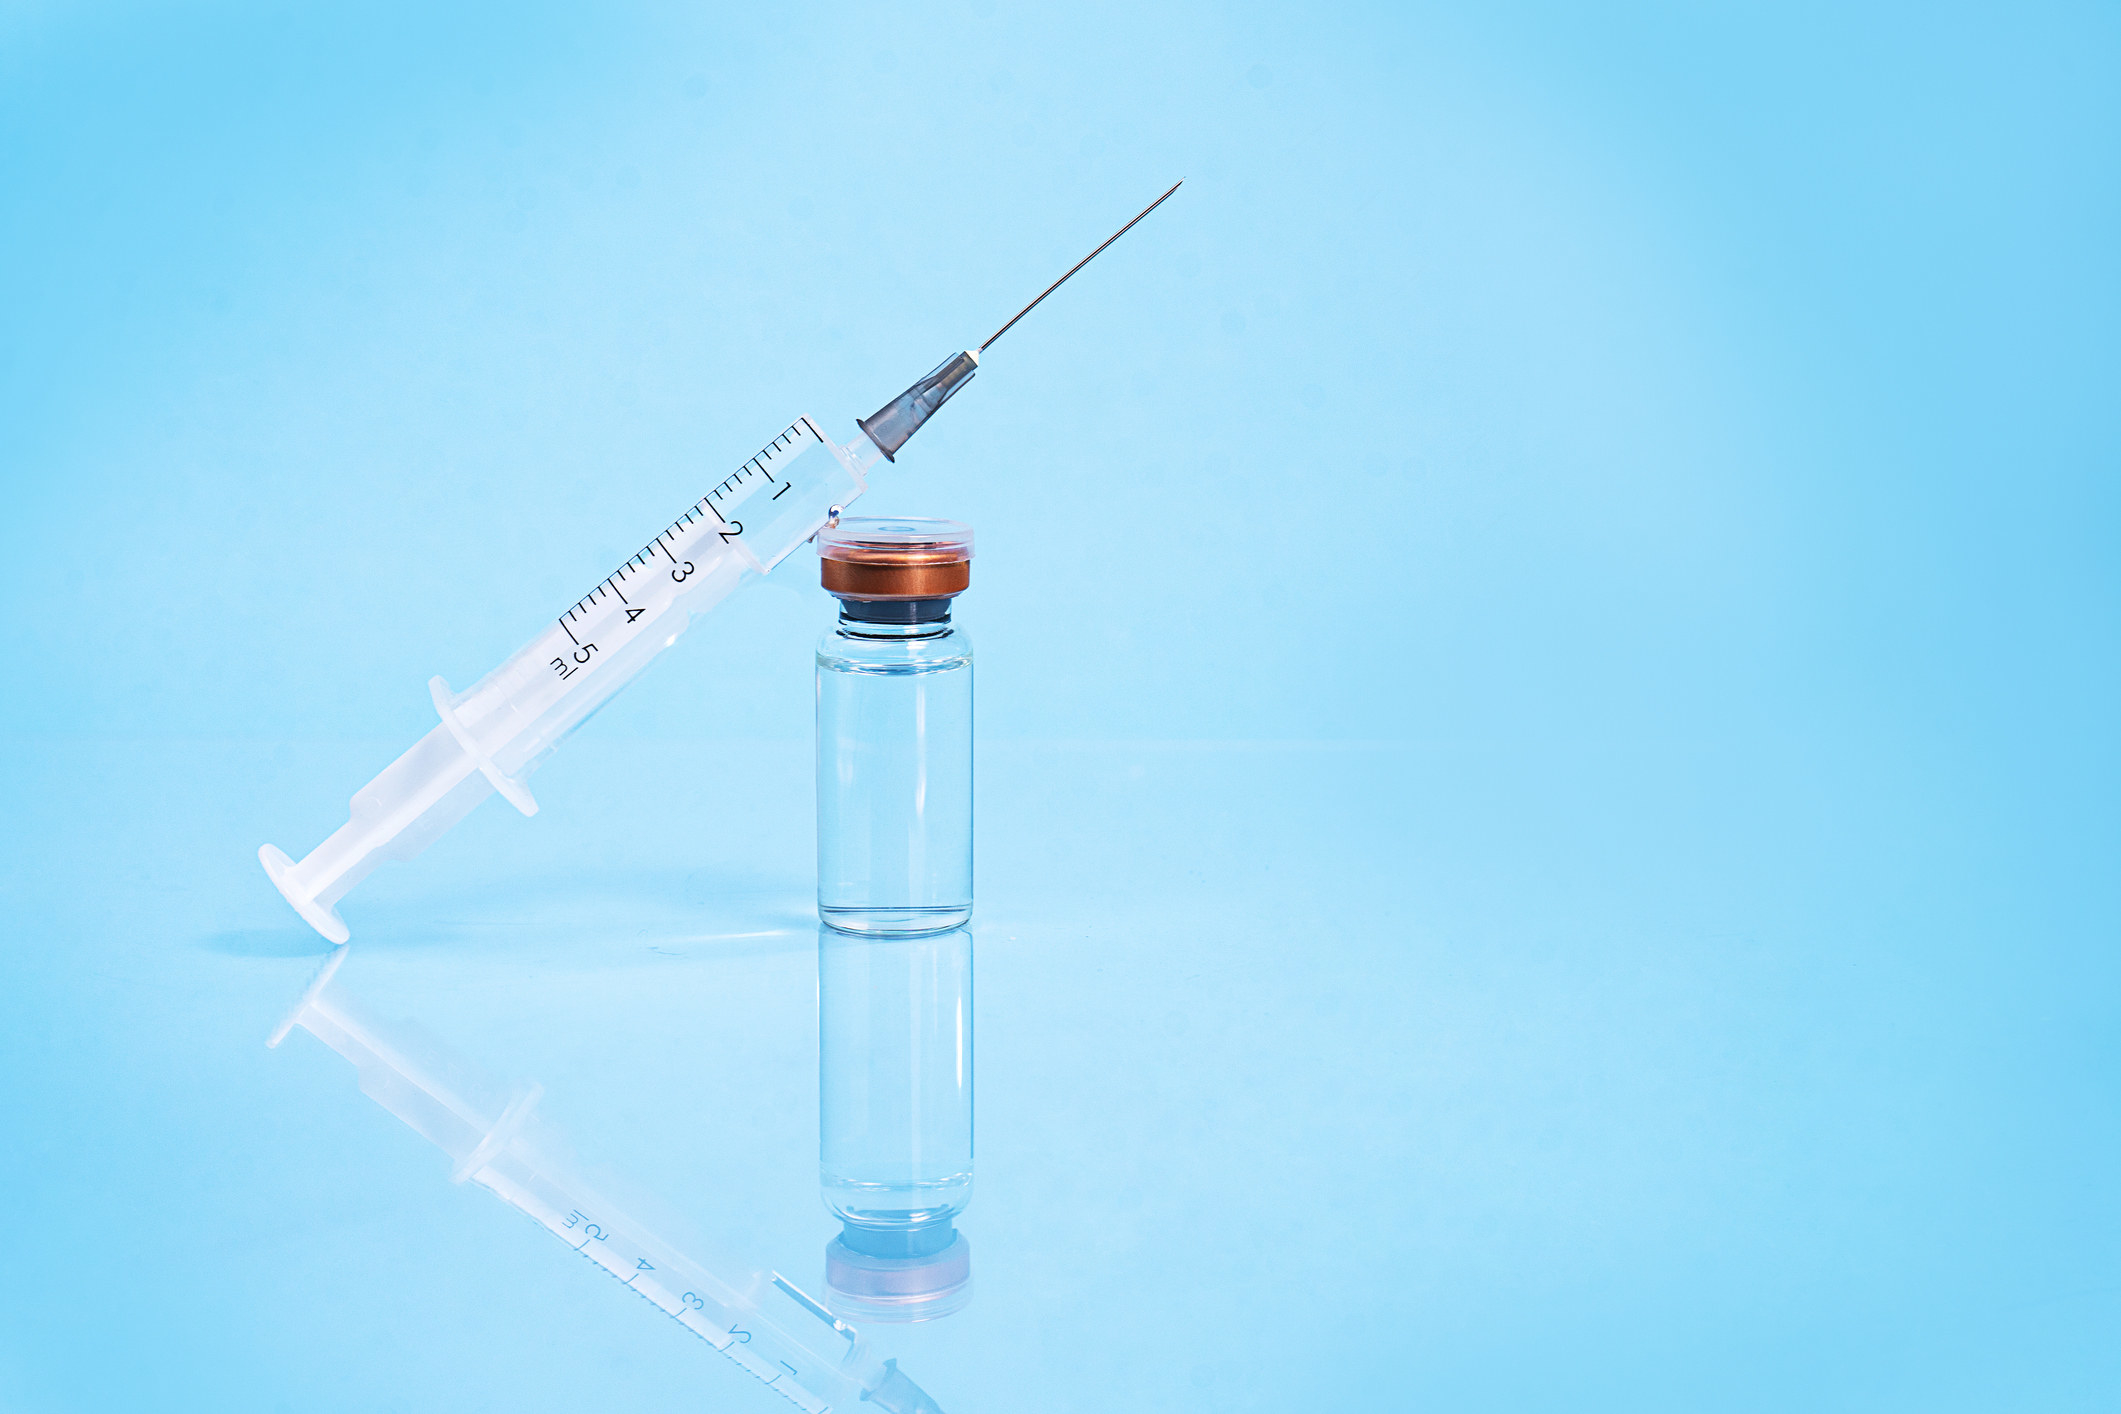 A photo of a needle syringe leaning on a medicine bottle